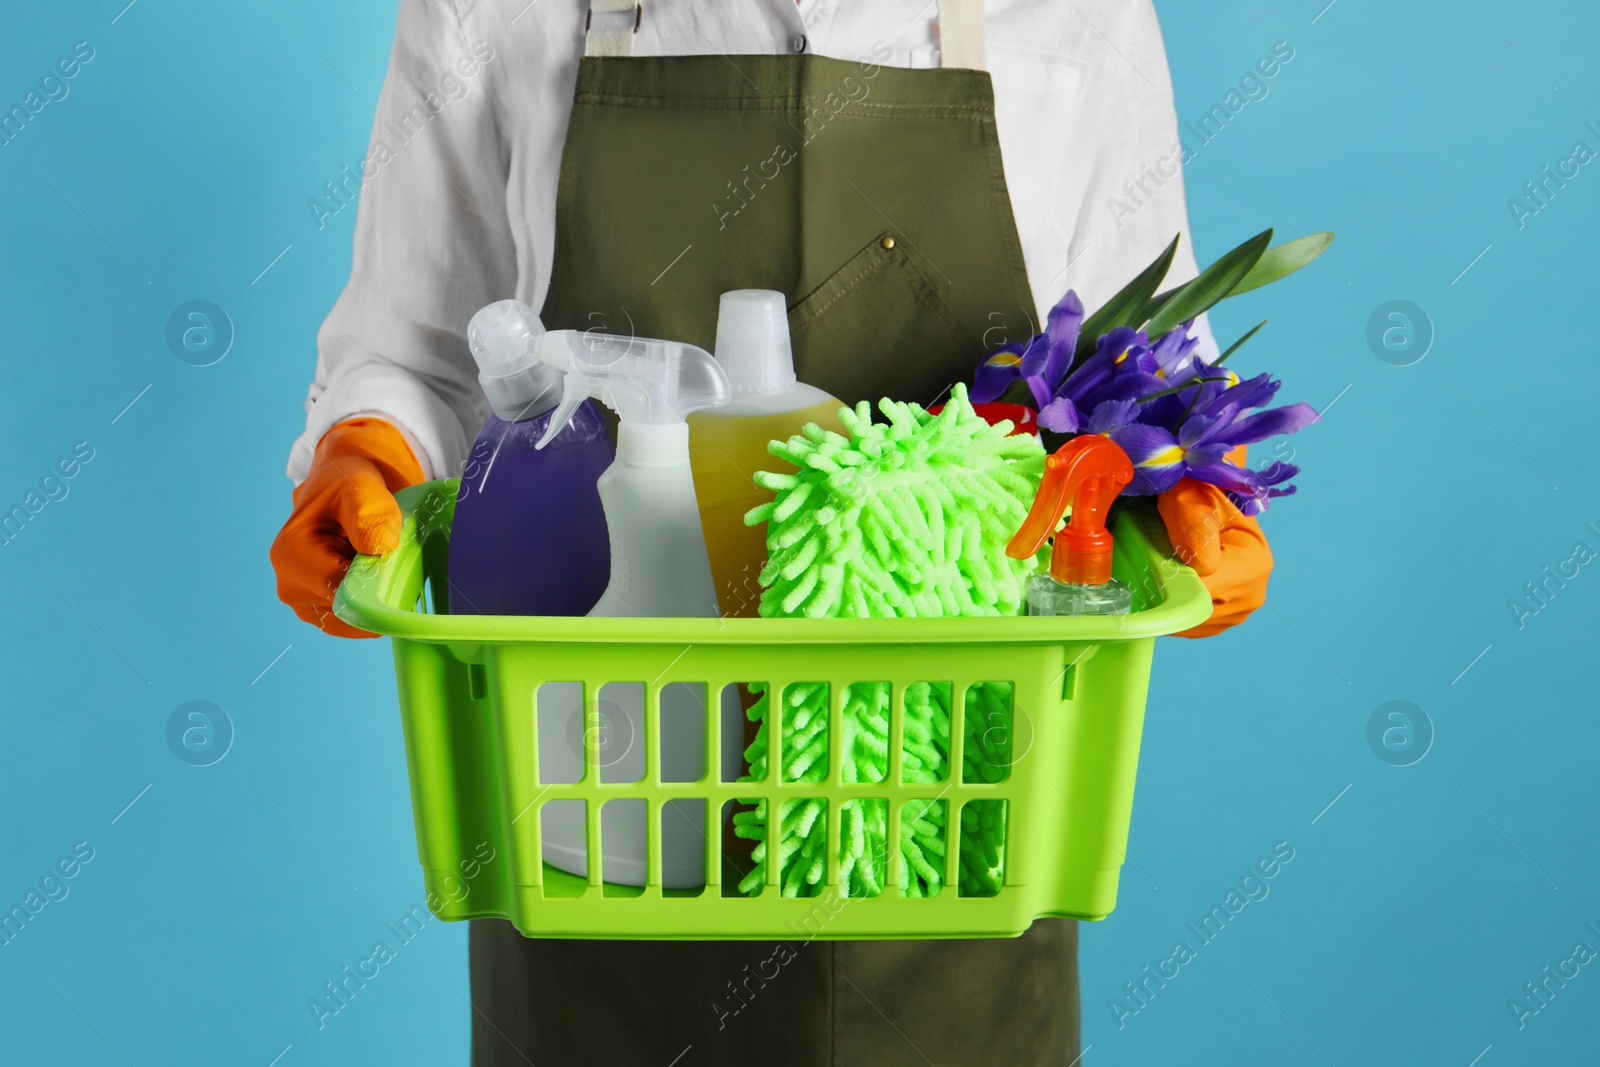 Photo of Spring cleaning. Woman holding basket with detergents, flowers and tools on light blue background, closeup